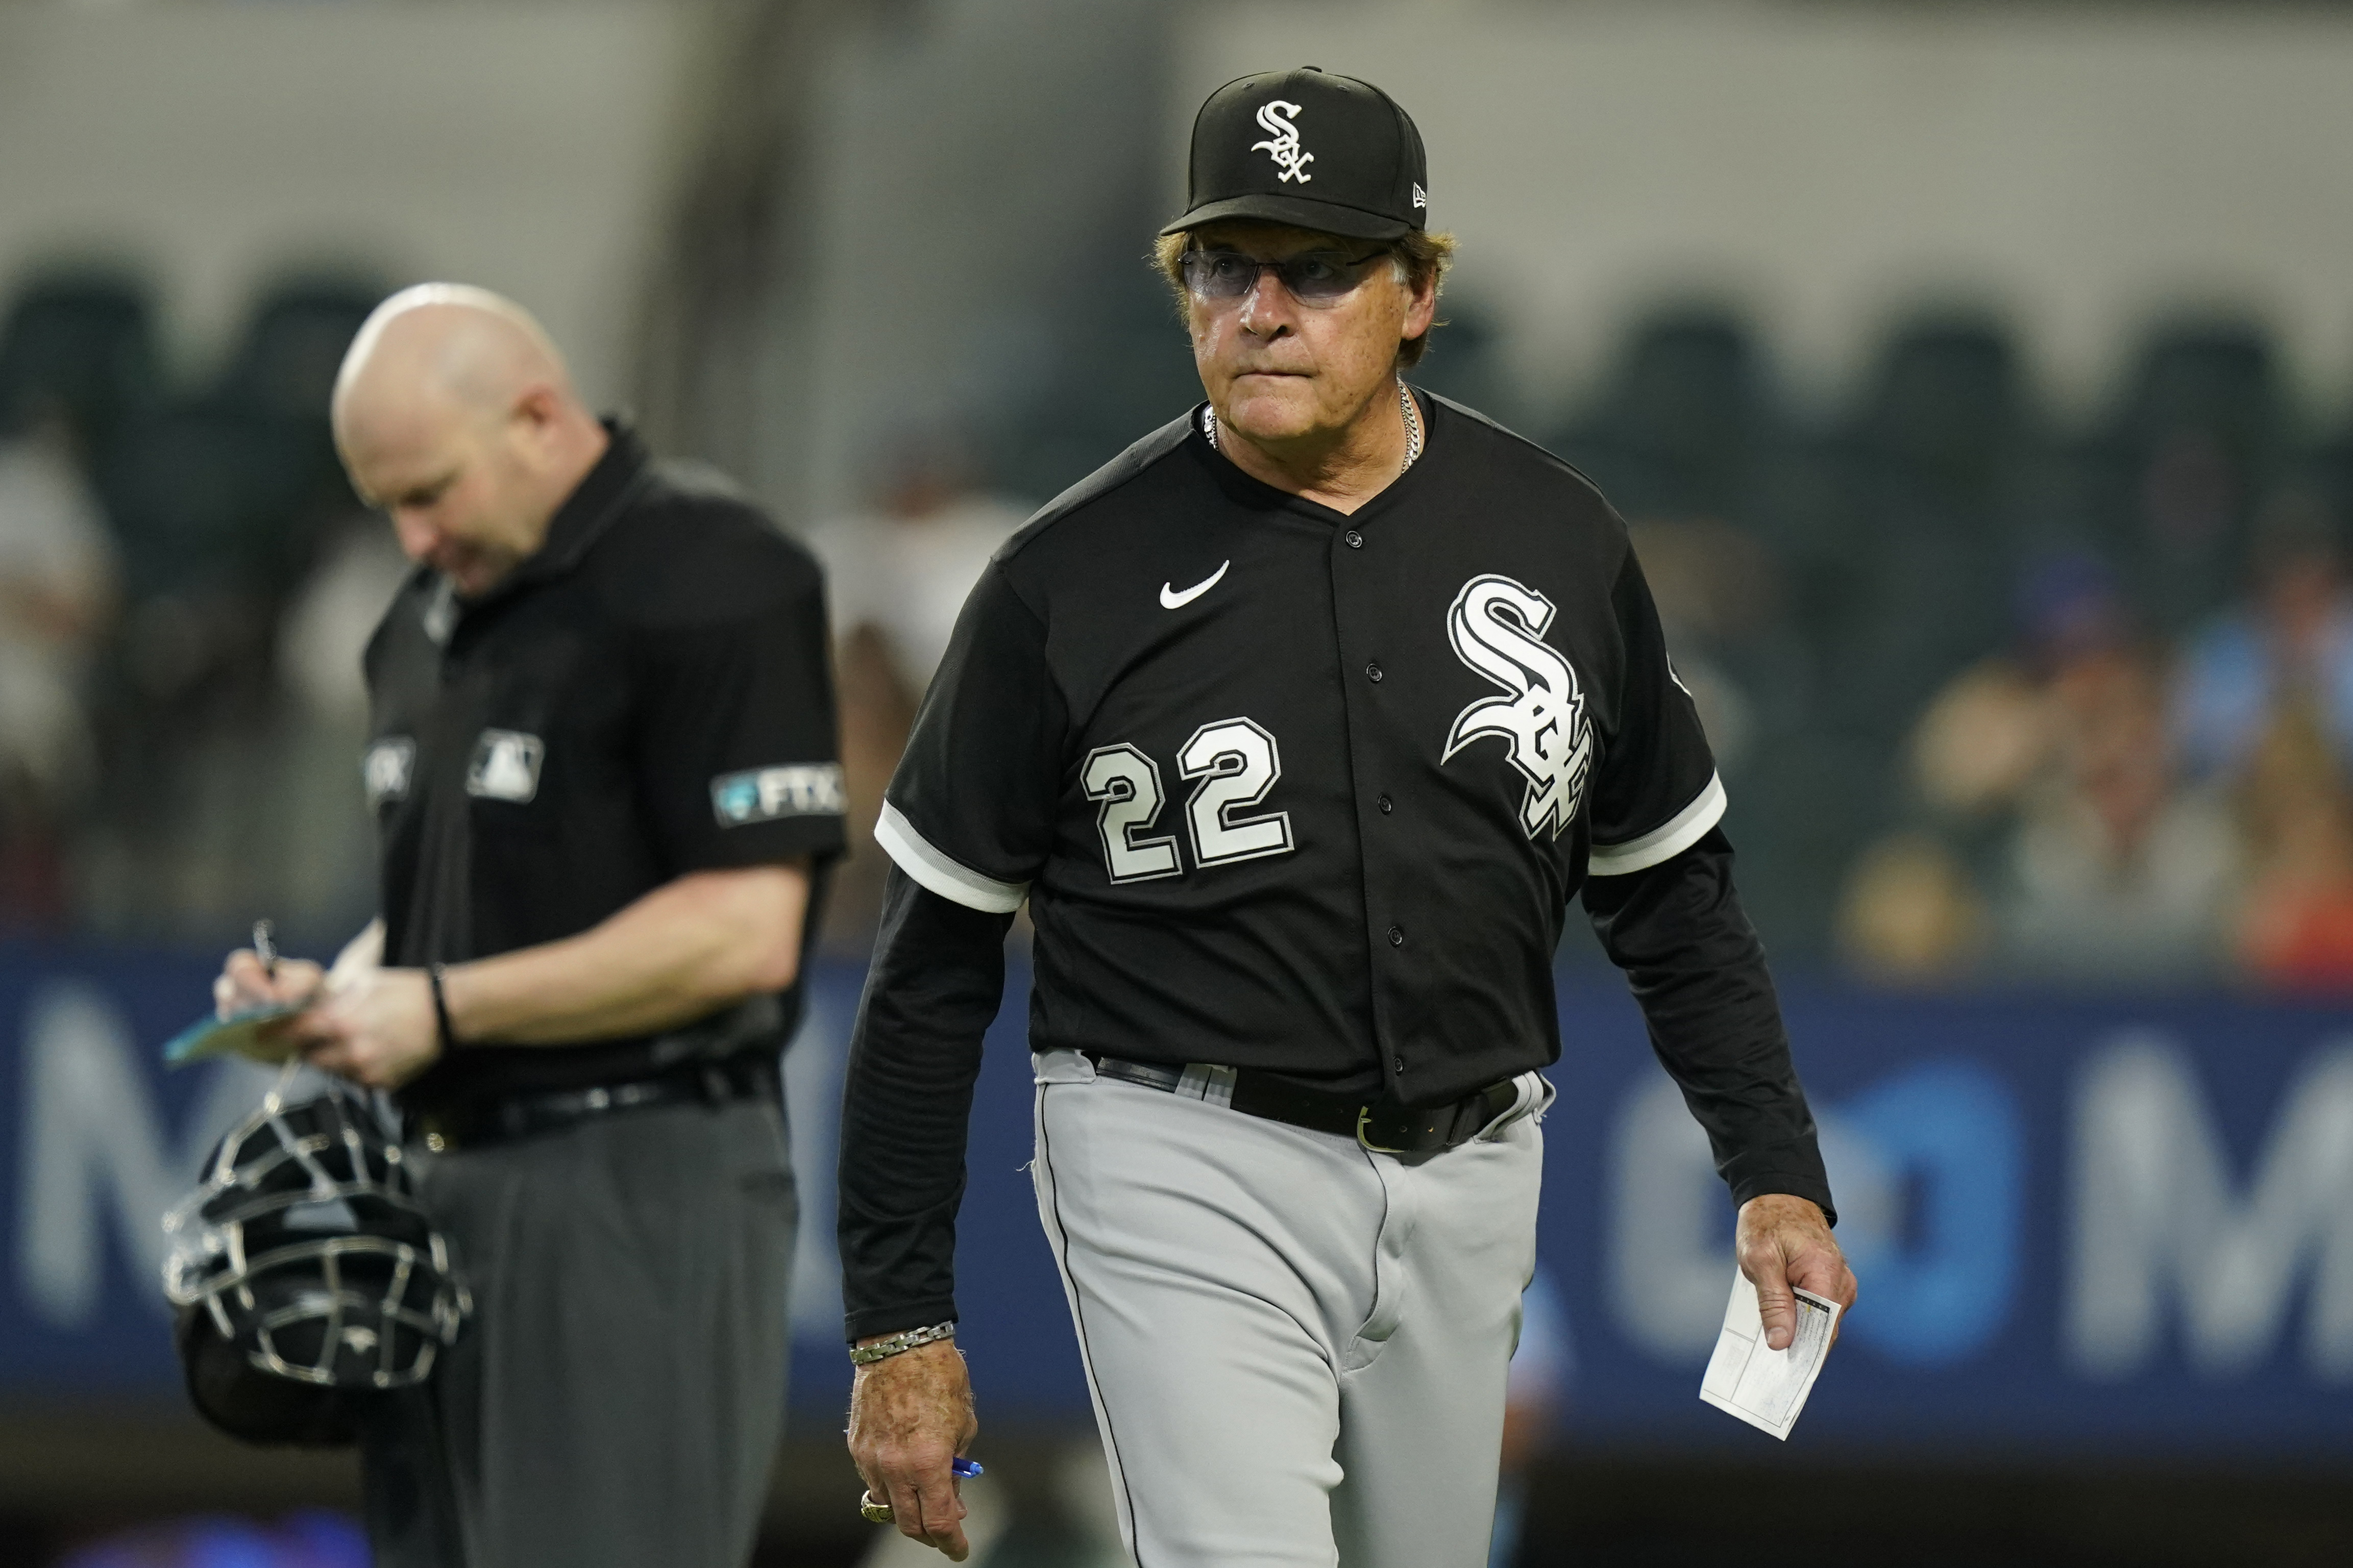 This is a 2022 photo of Tony La Russa of the Chicago White Sox